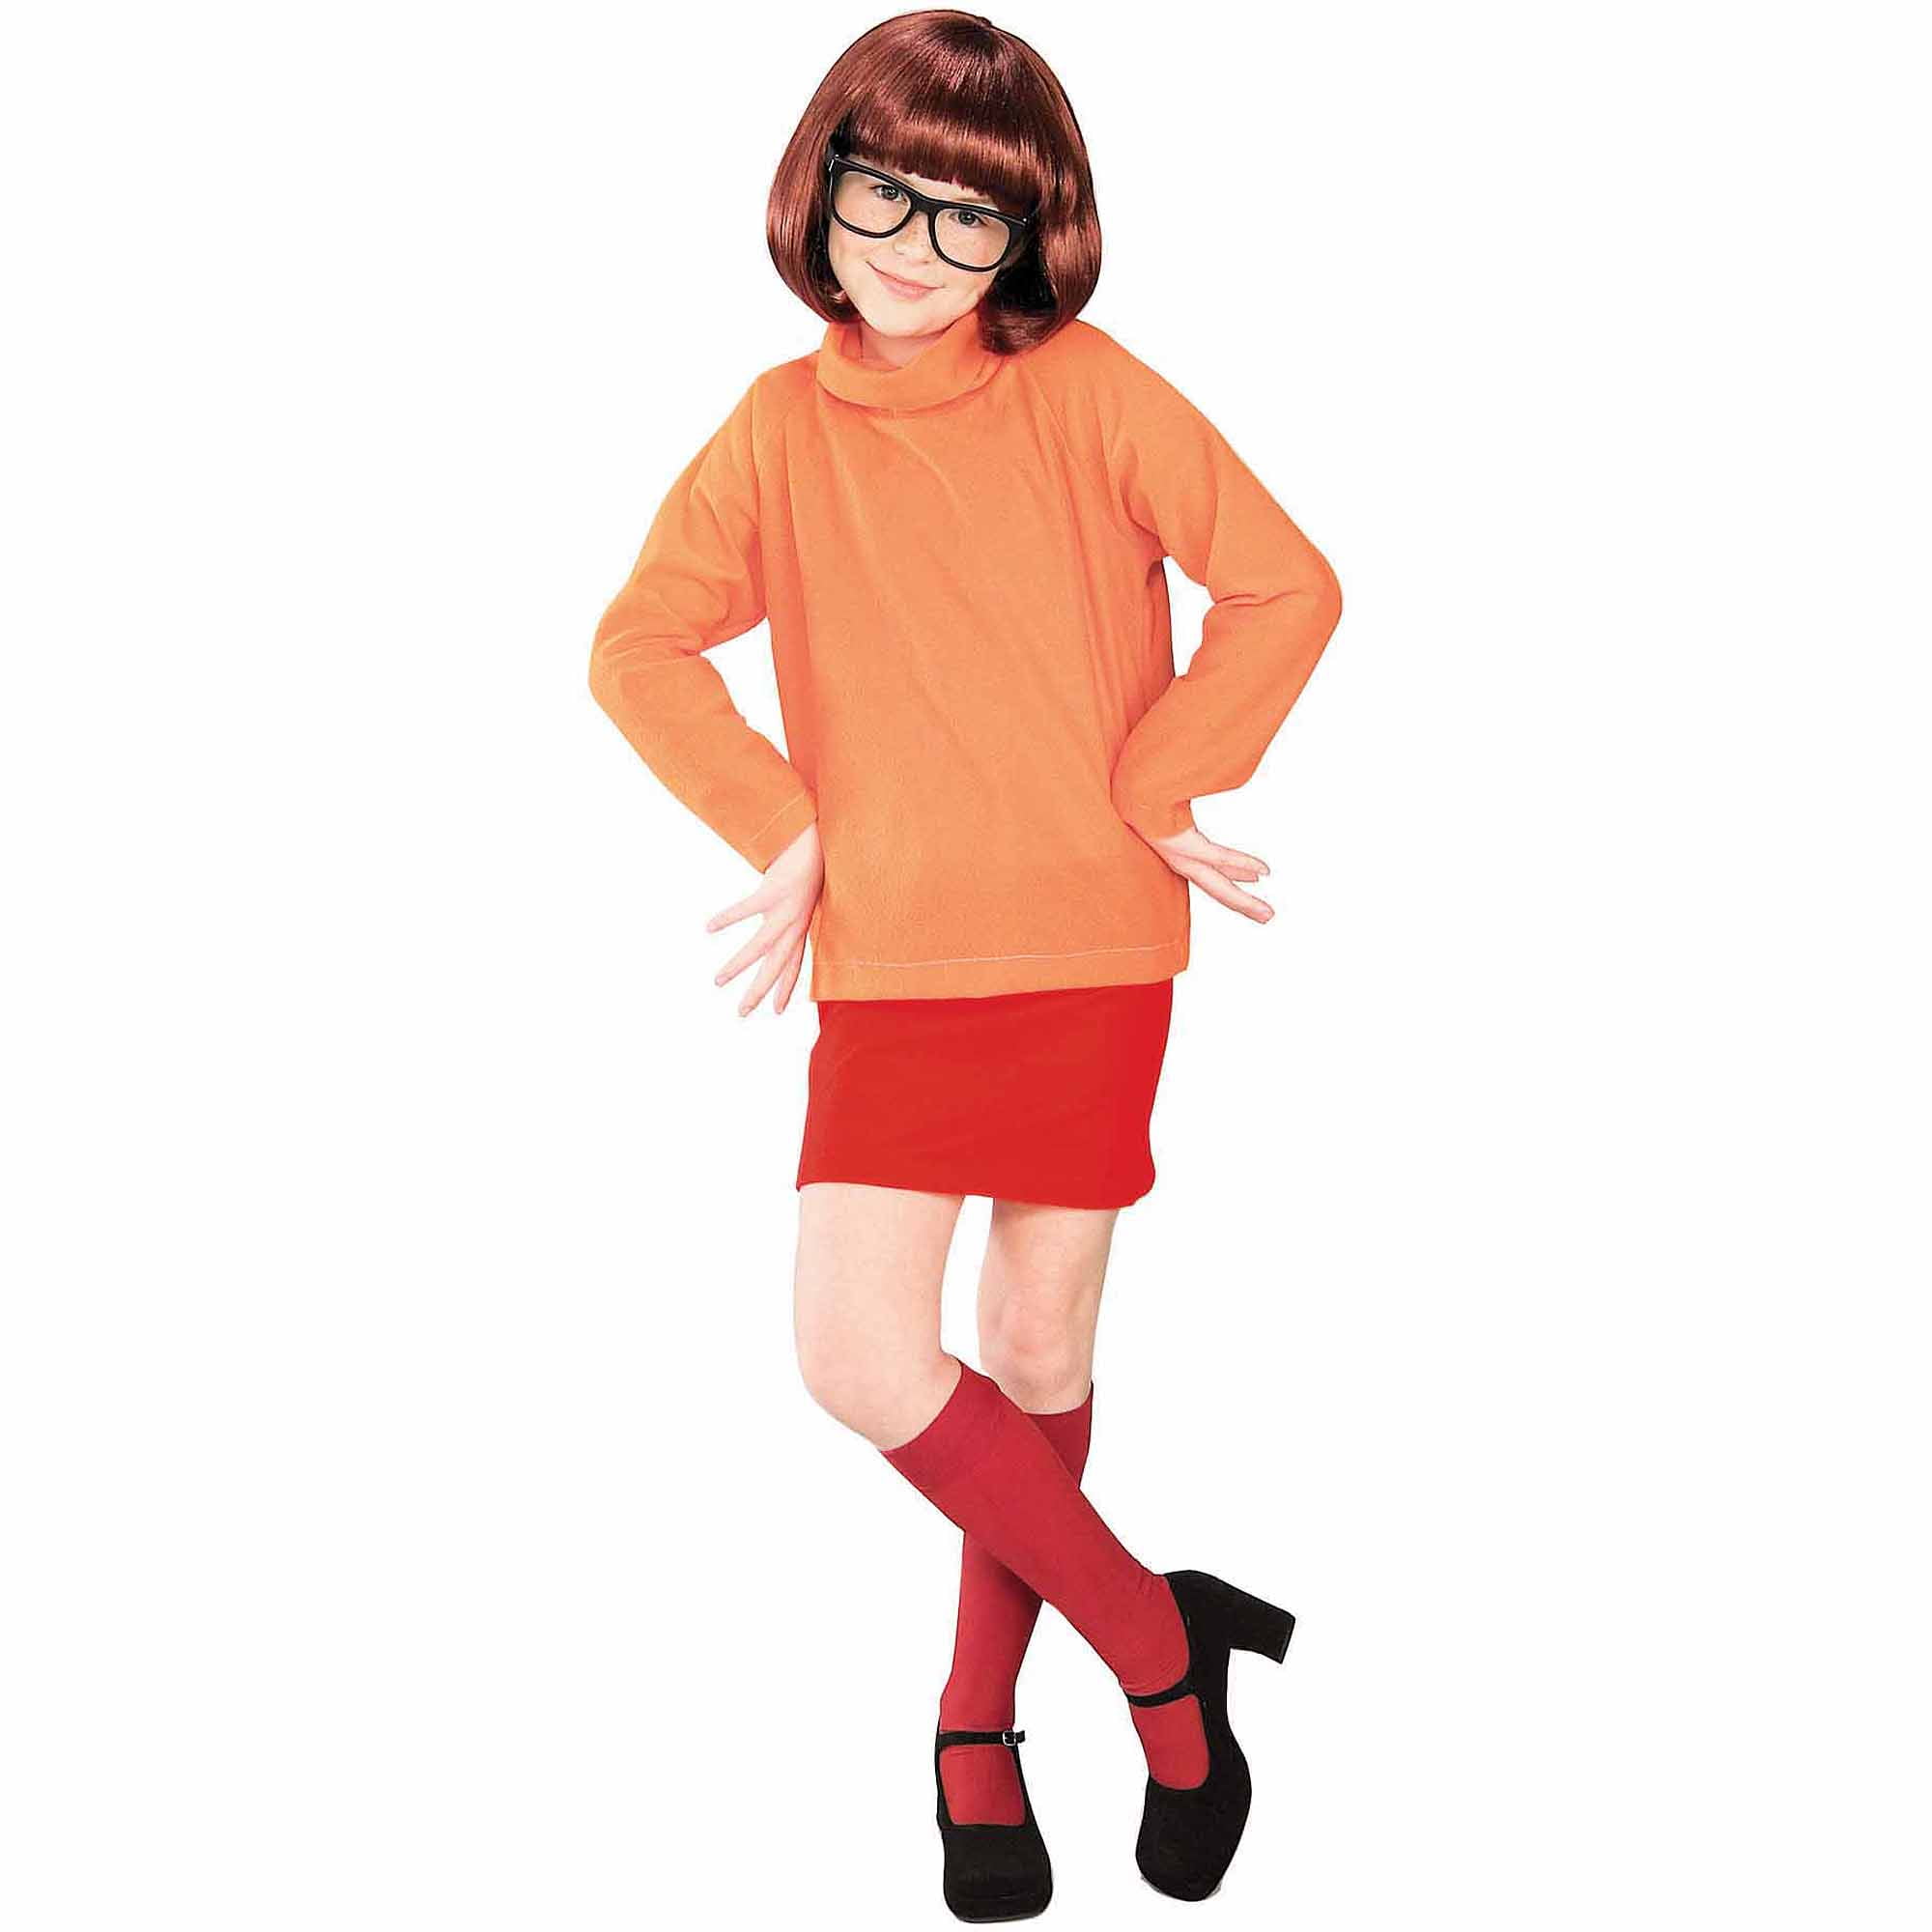 Doo Childs Deluxe Scooby Costume Rubies Costume Scooby Small